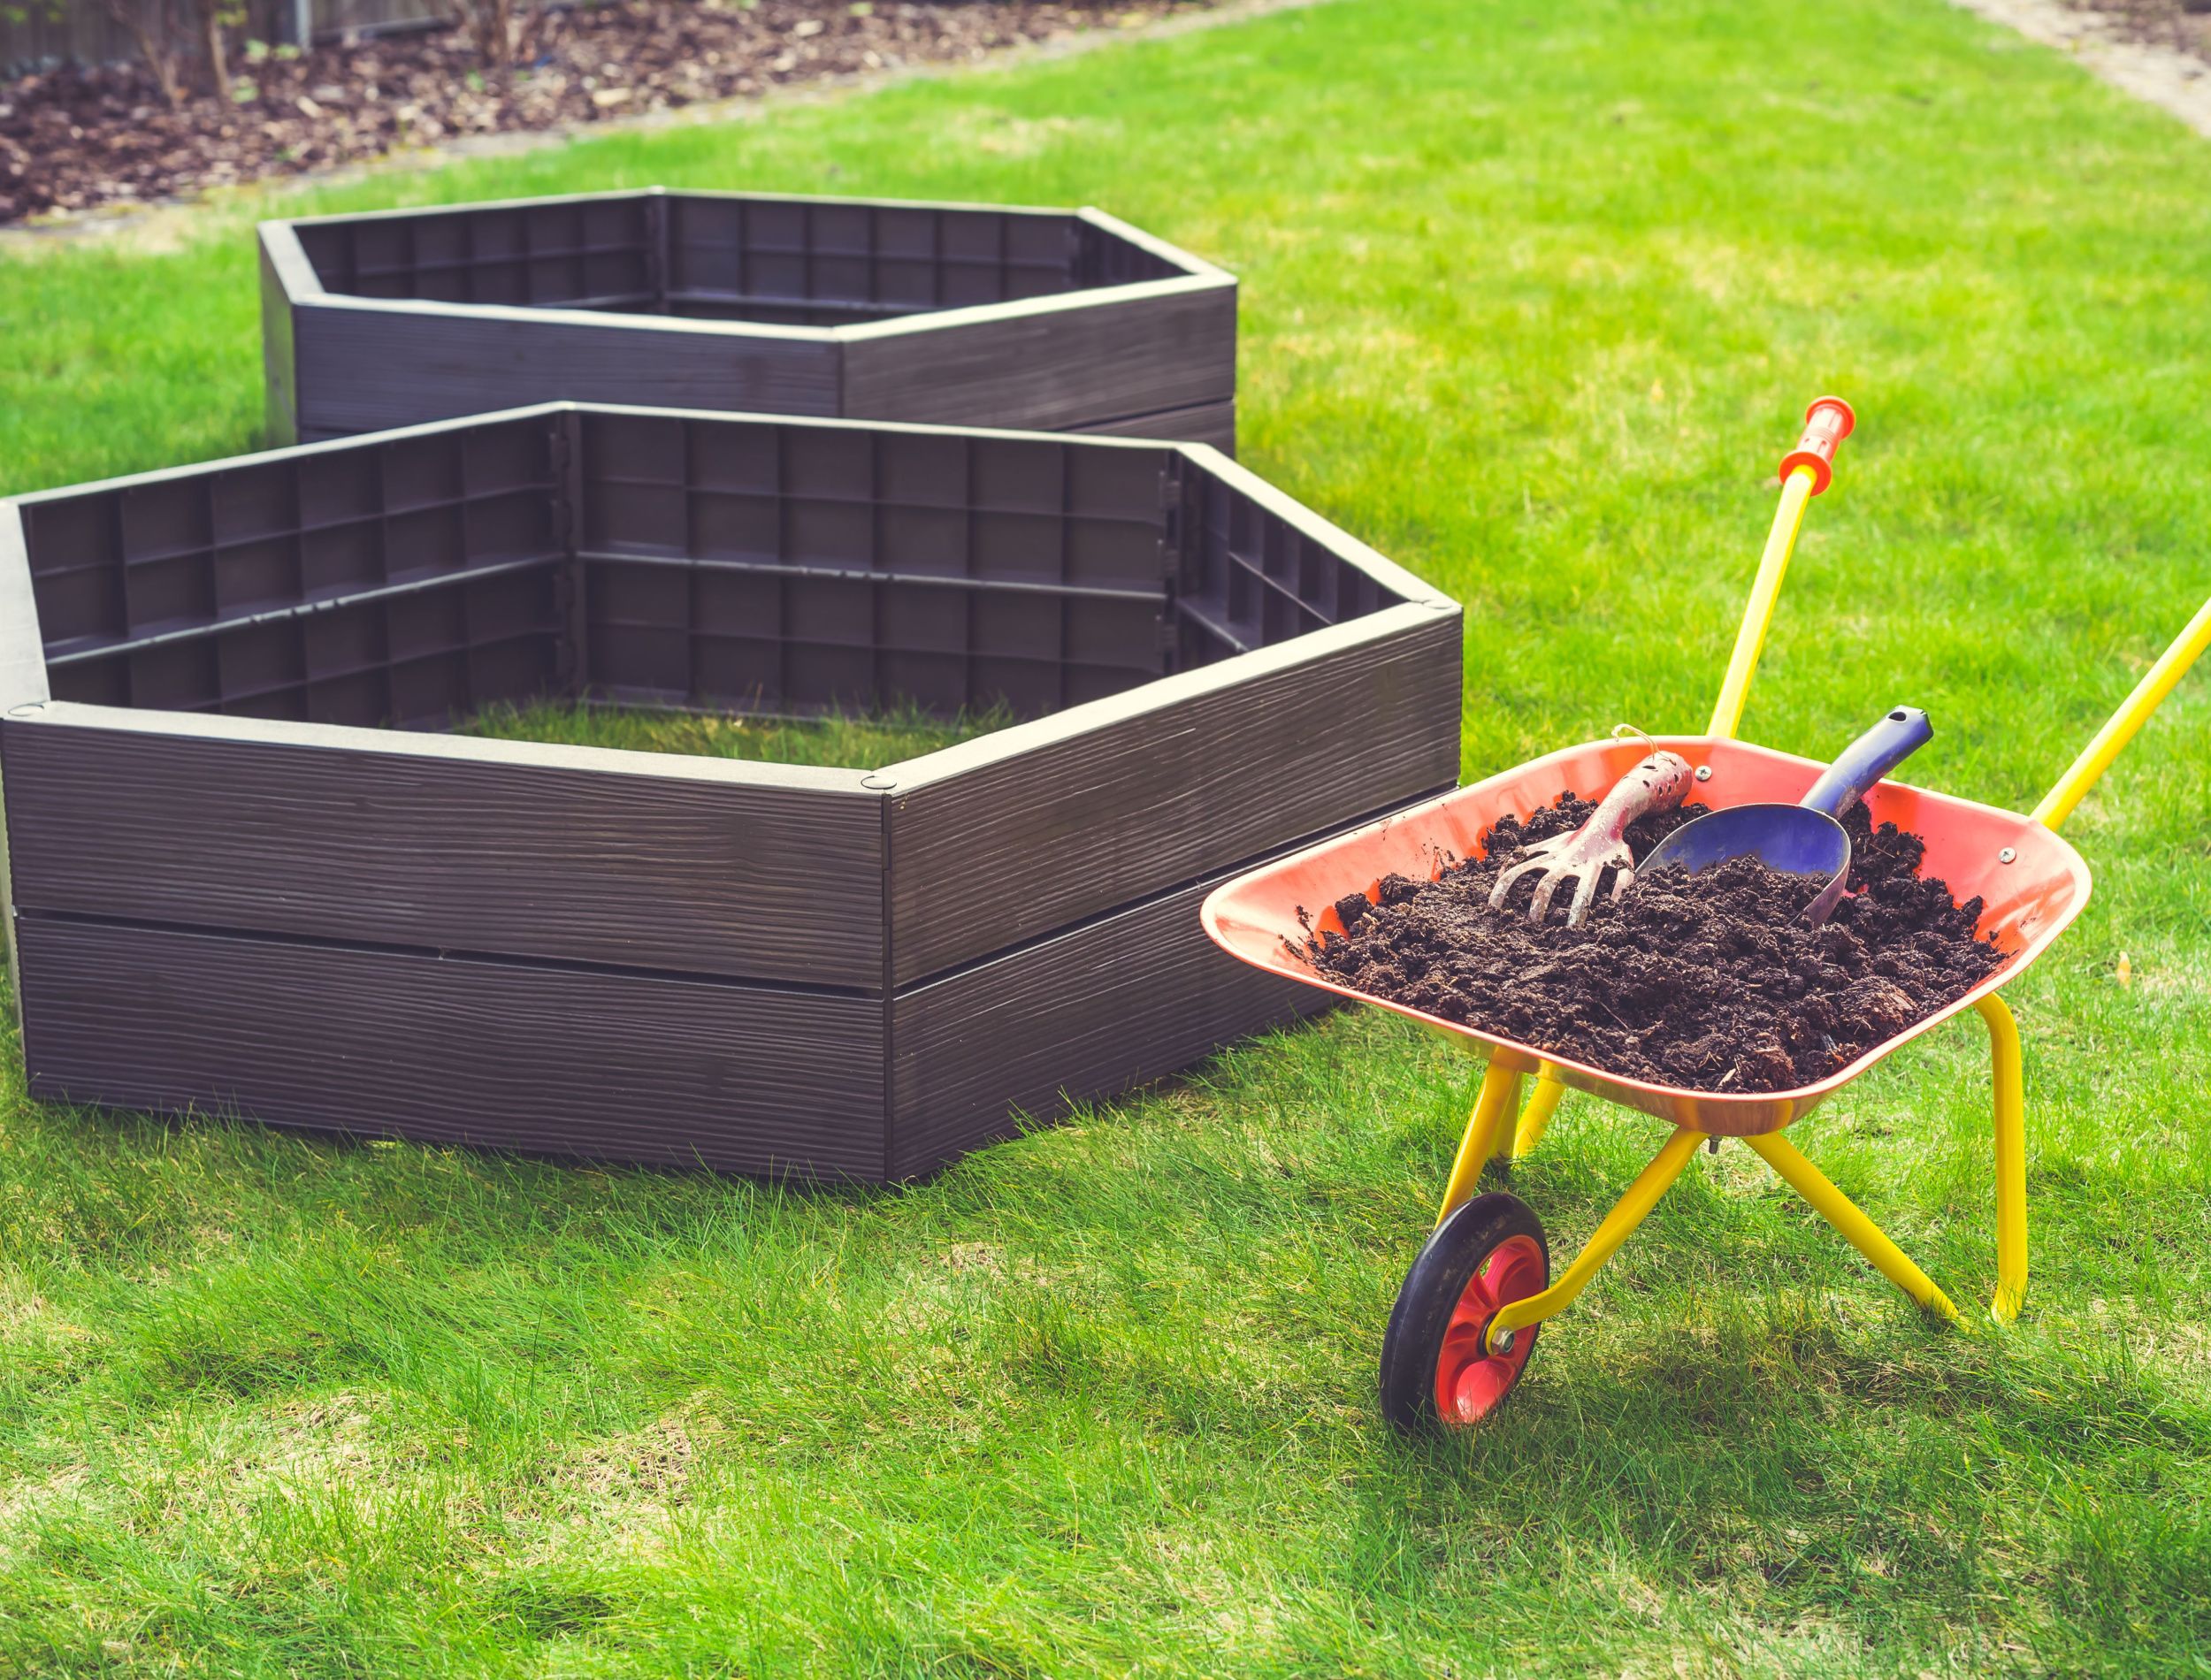 How to Fill a Raised Garden Bed - cover